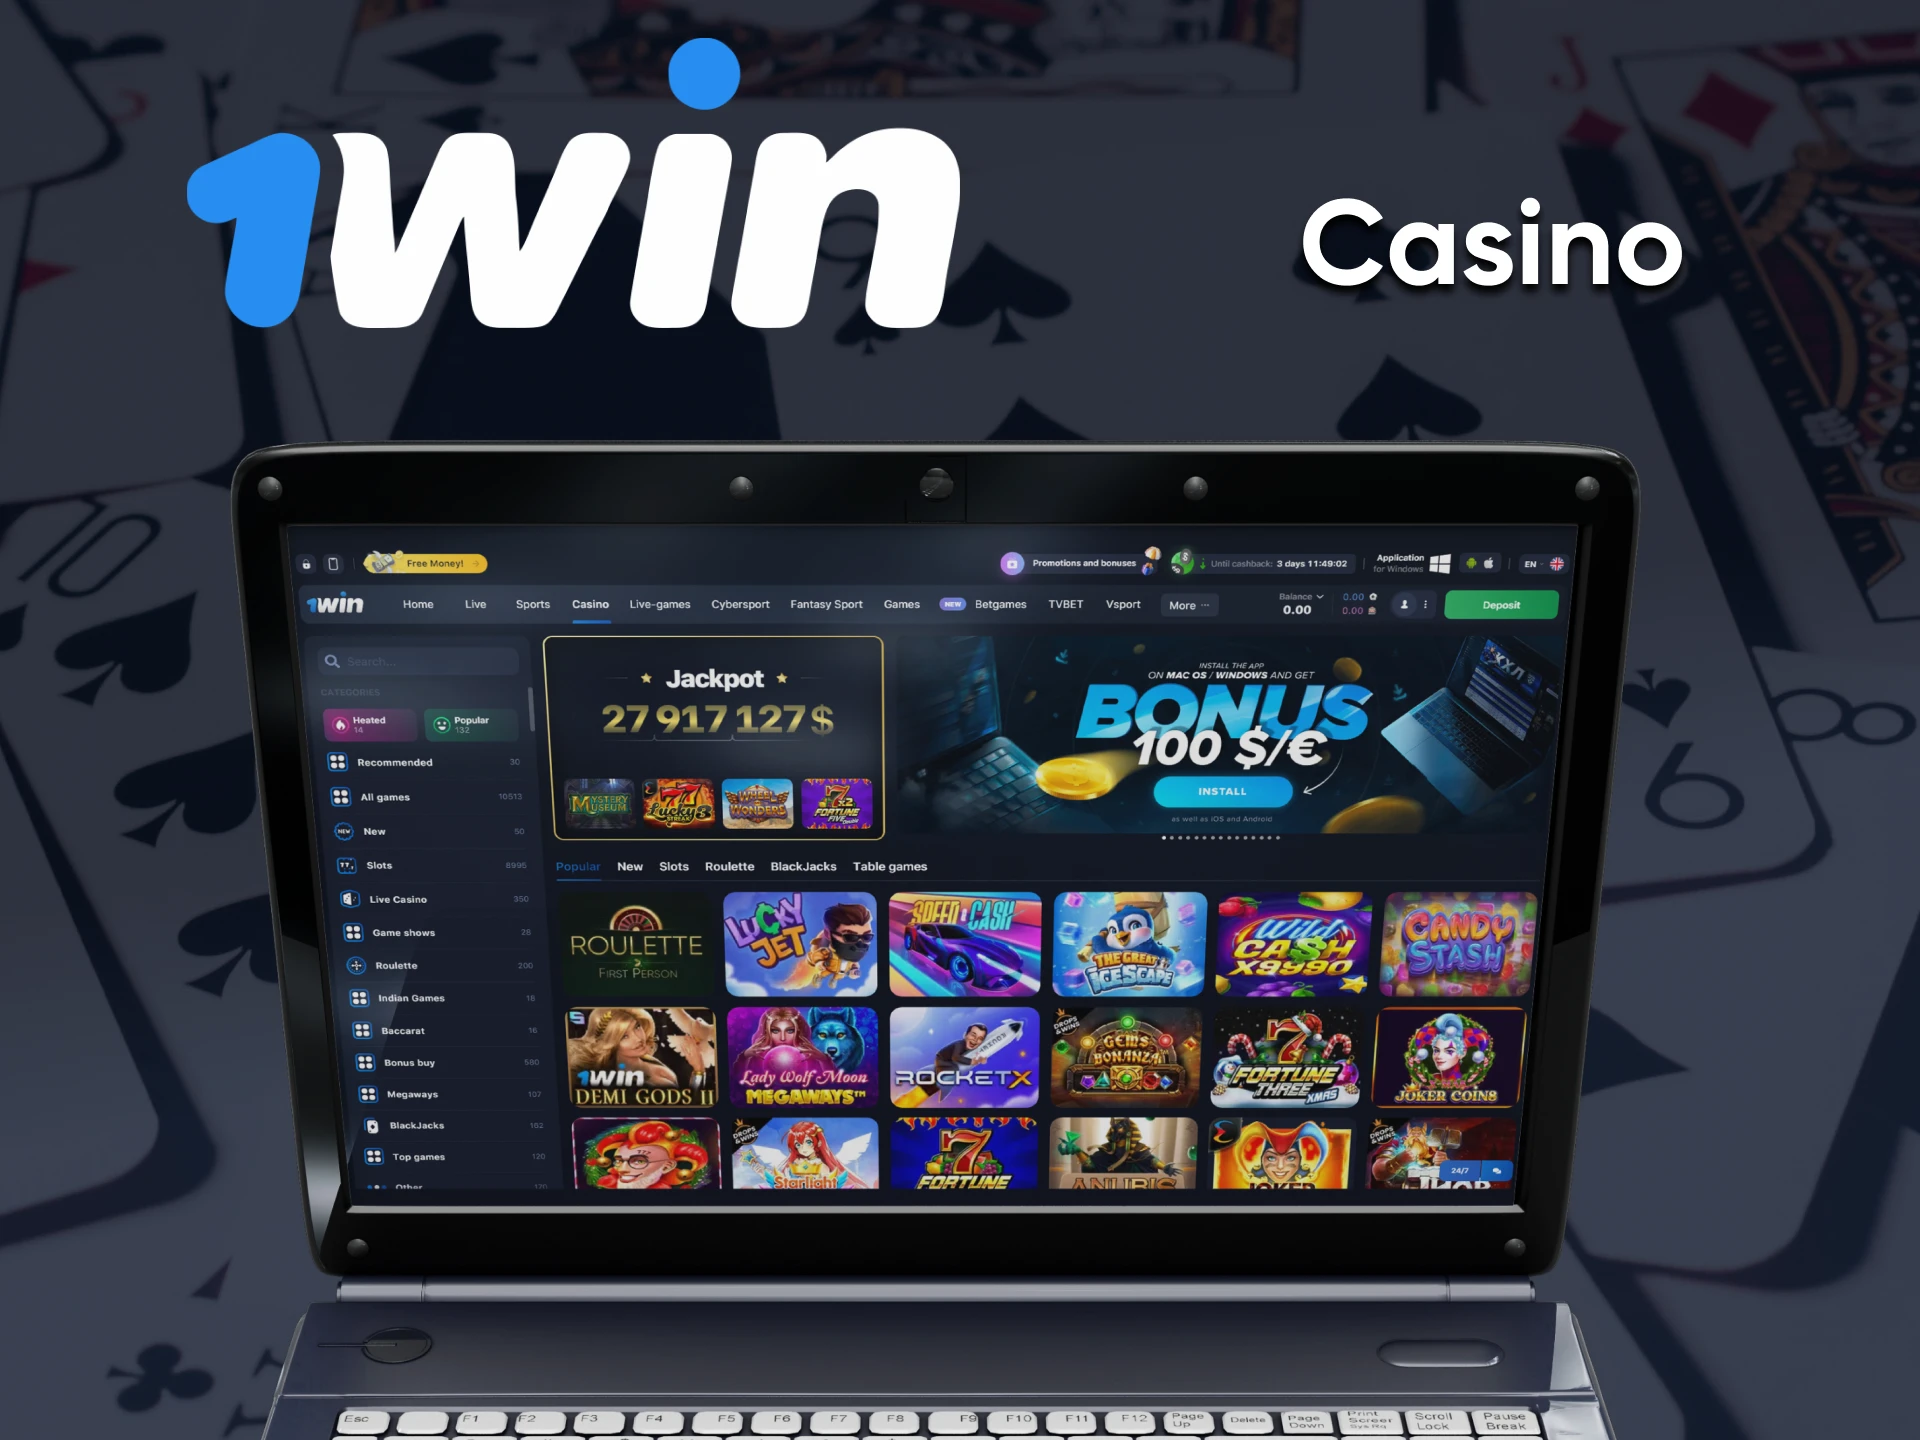 For casino games, use the 1win service.